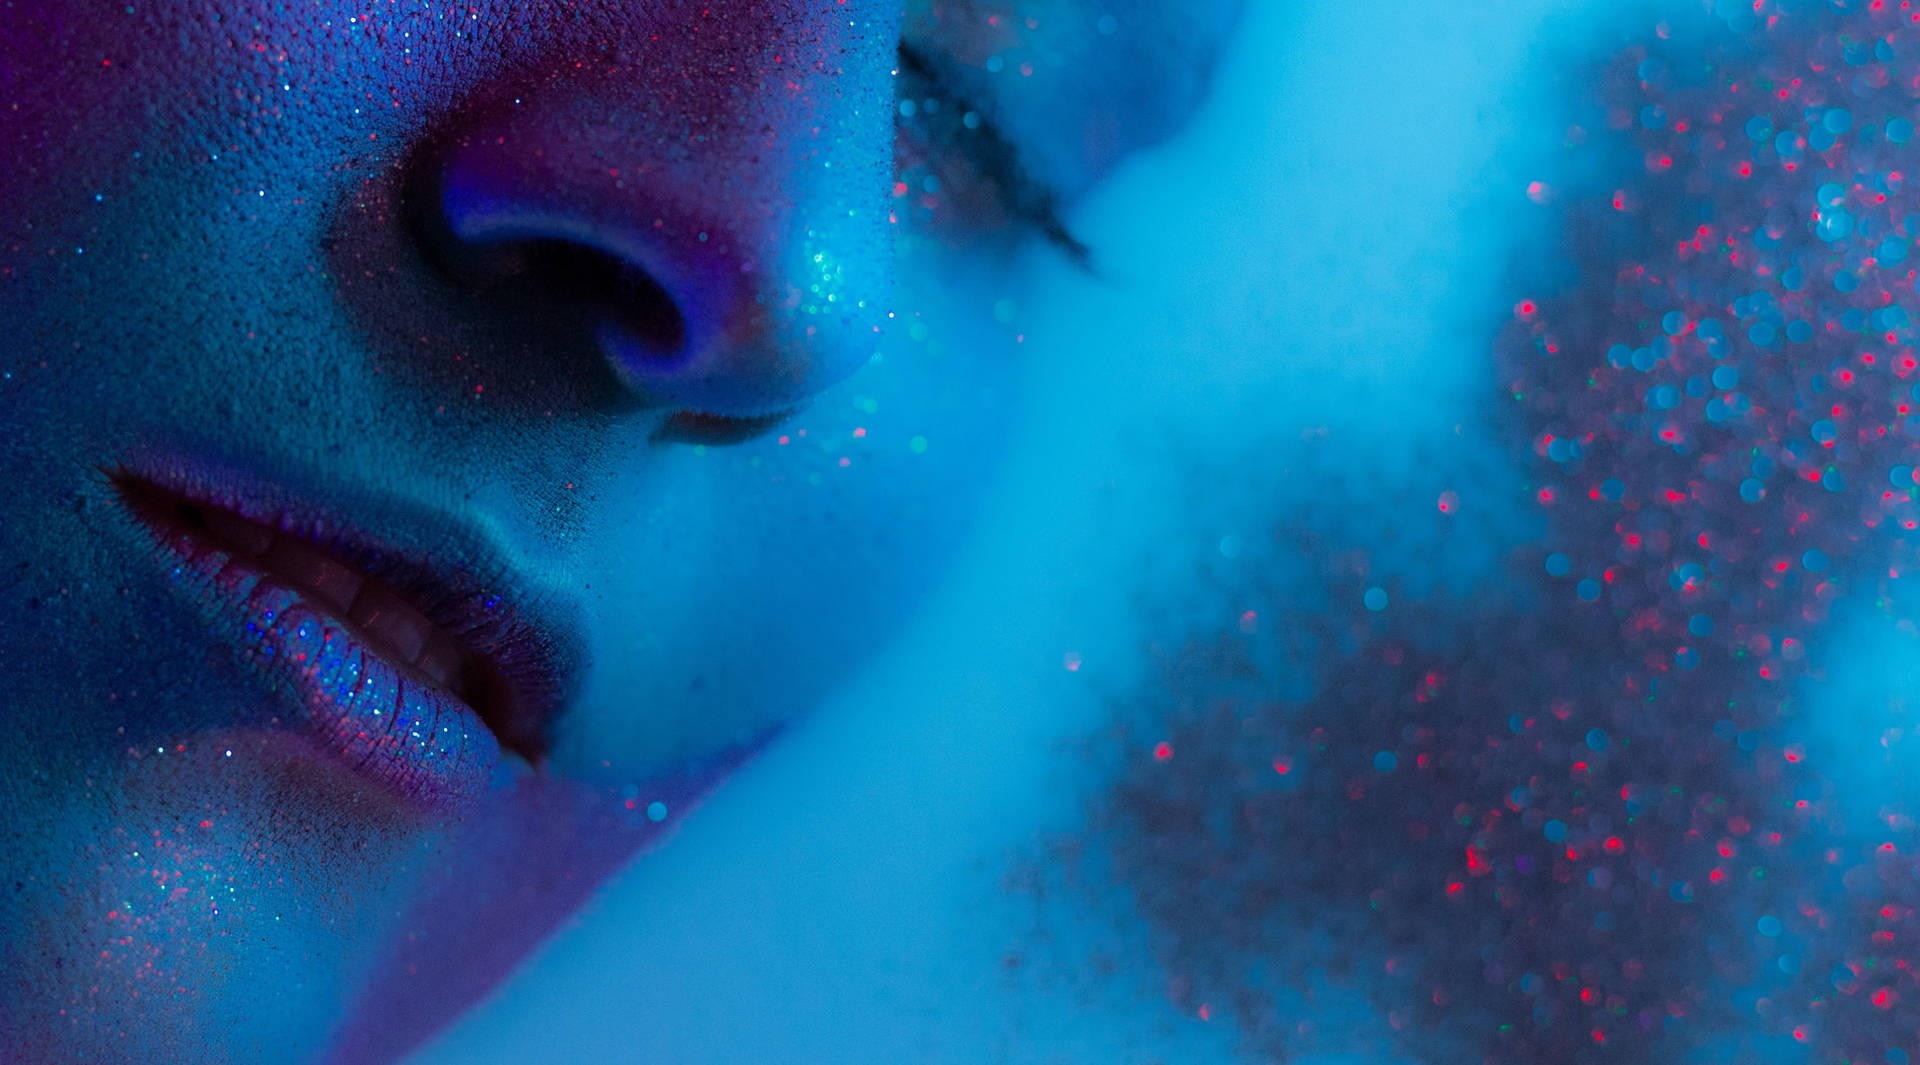 Blue Glitter On Woman's Face Background